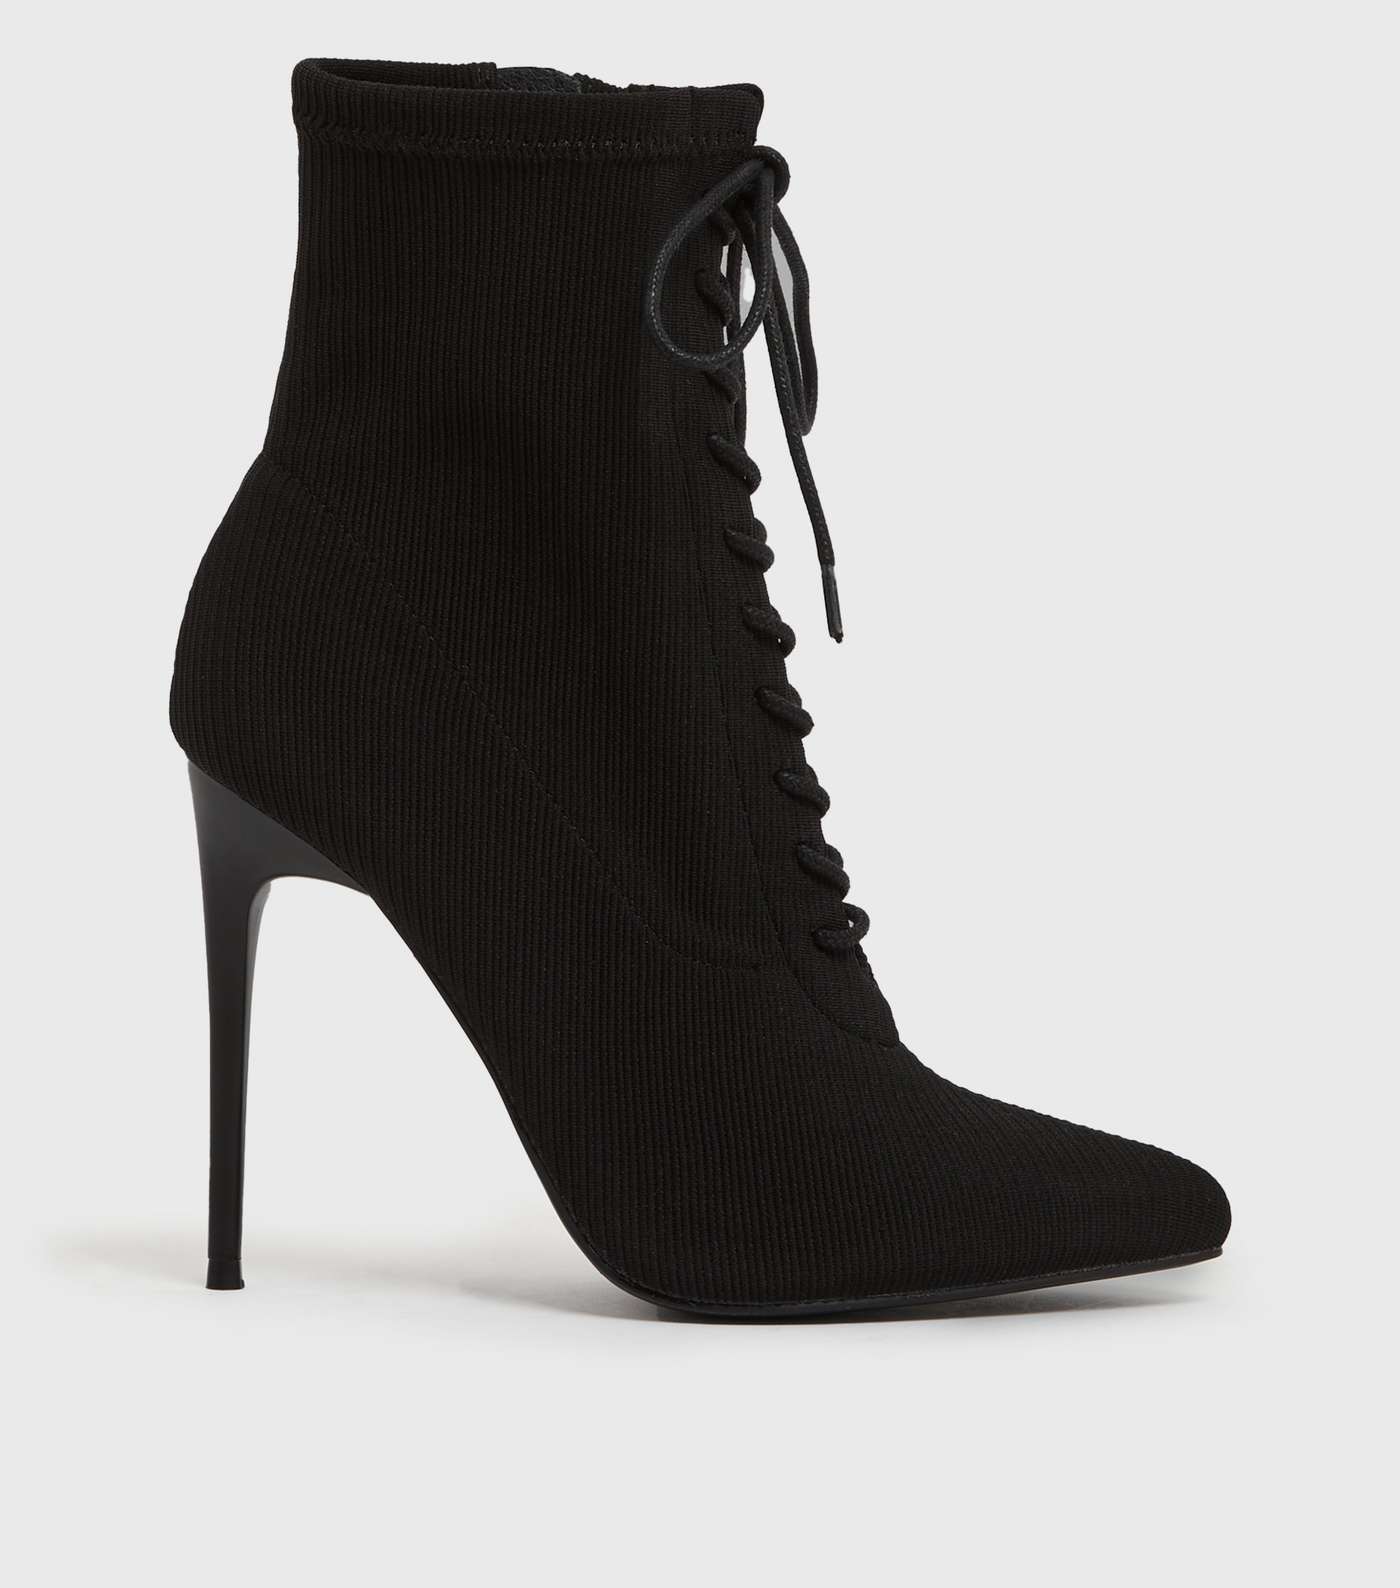 Black Knit Lace Up Stiletto Heel Ankle Boots